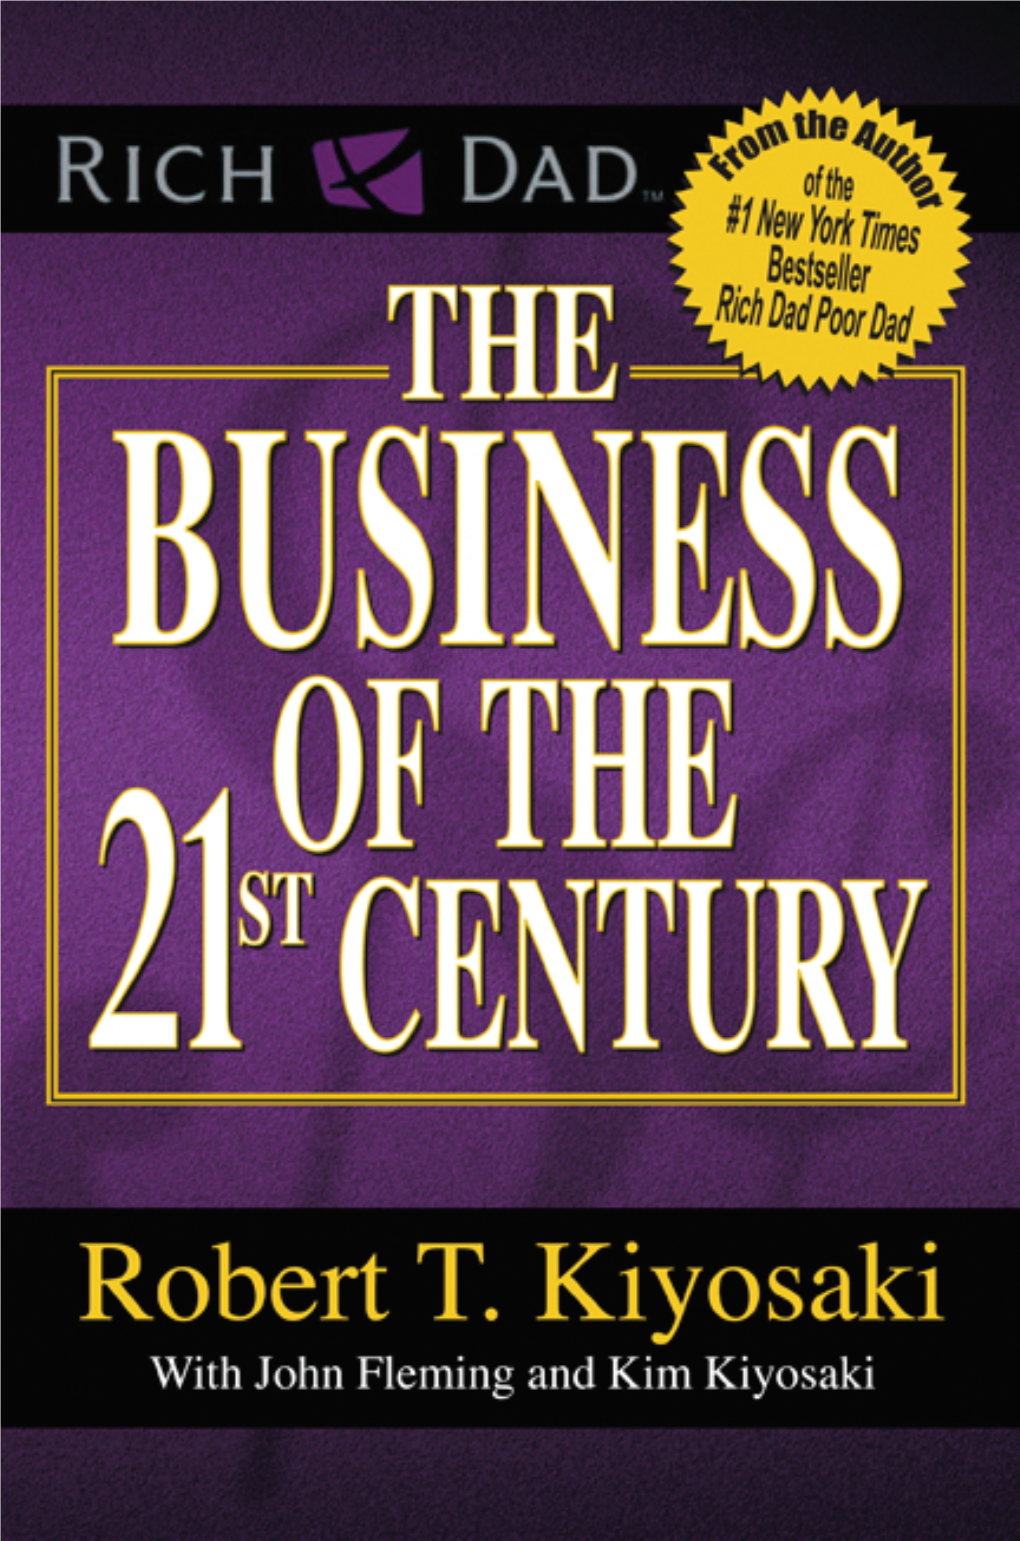 The Business of the 21St Century.Pdf